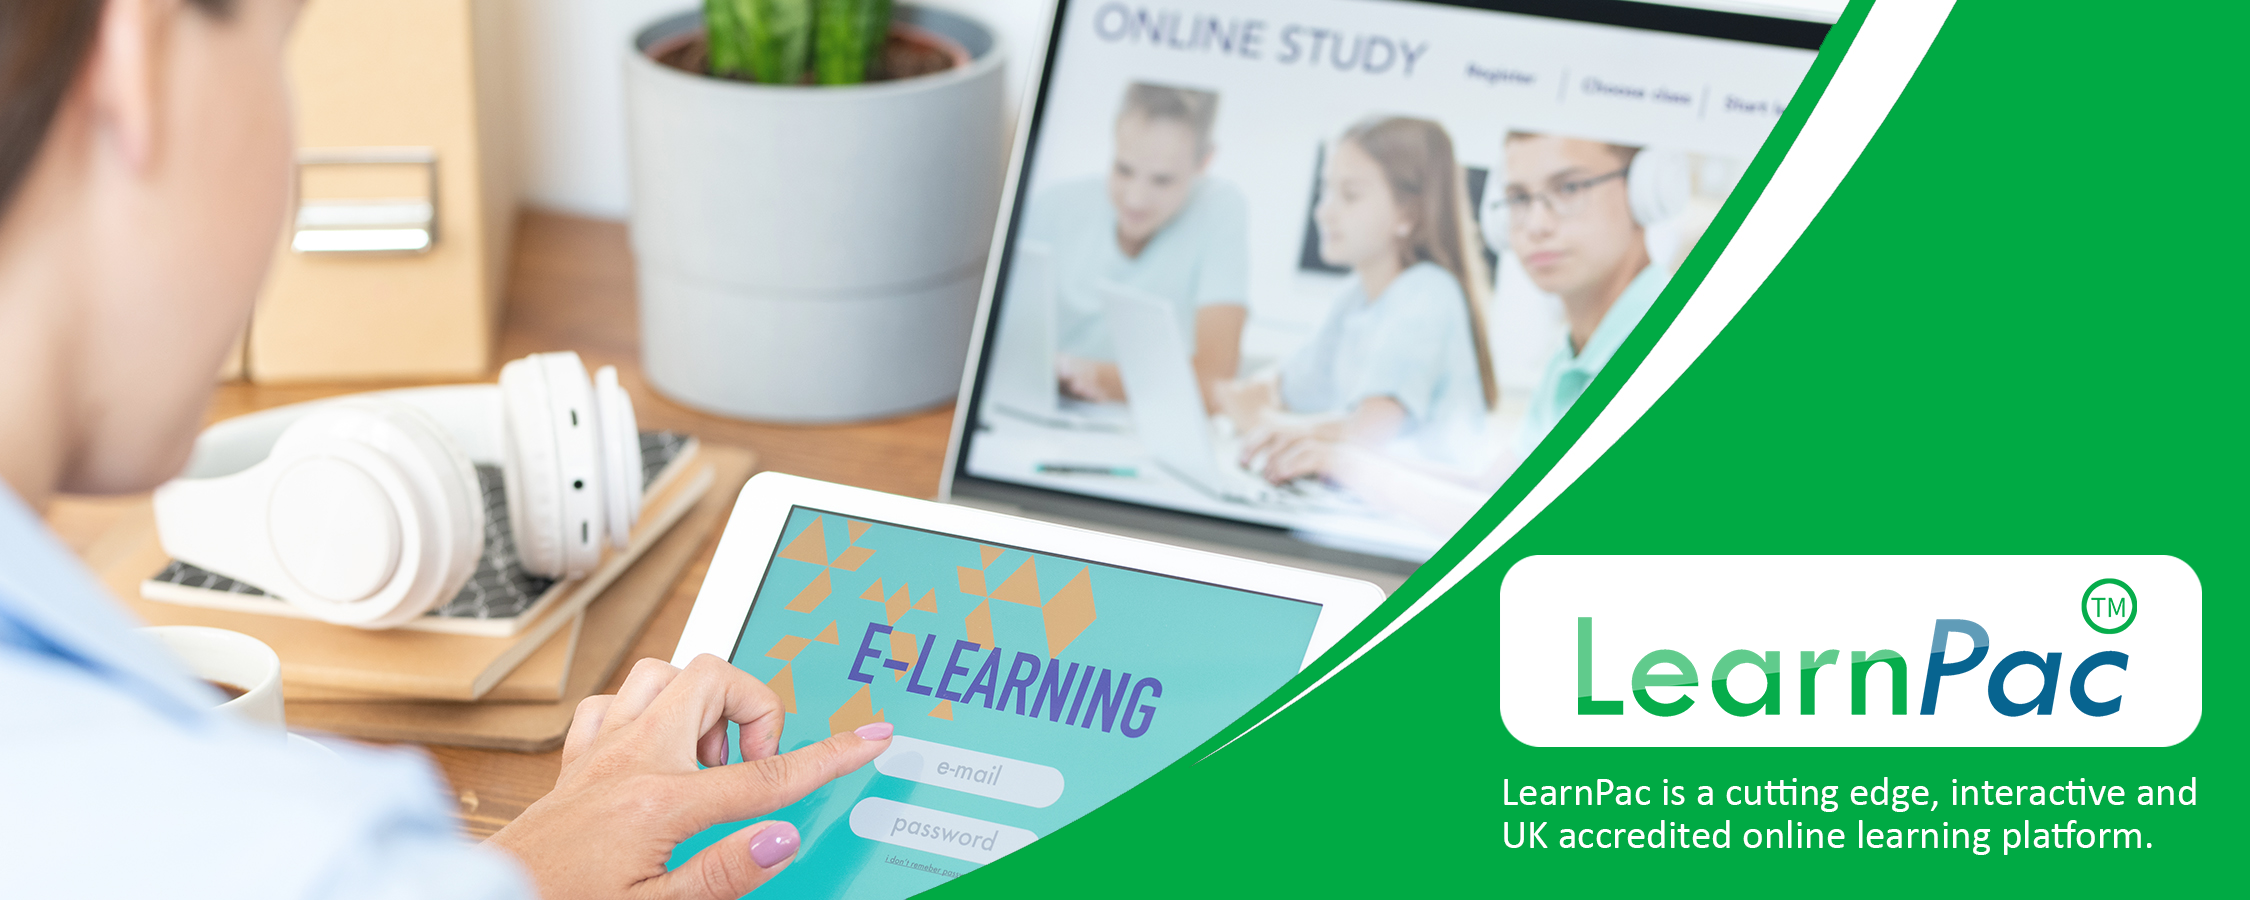 Report Writing in Health & Social Care Homes - Level 2 - Online Learning Courses - E-Learning Courses - LearnPac Systems UK -